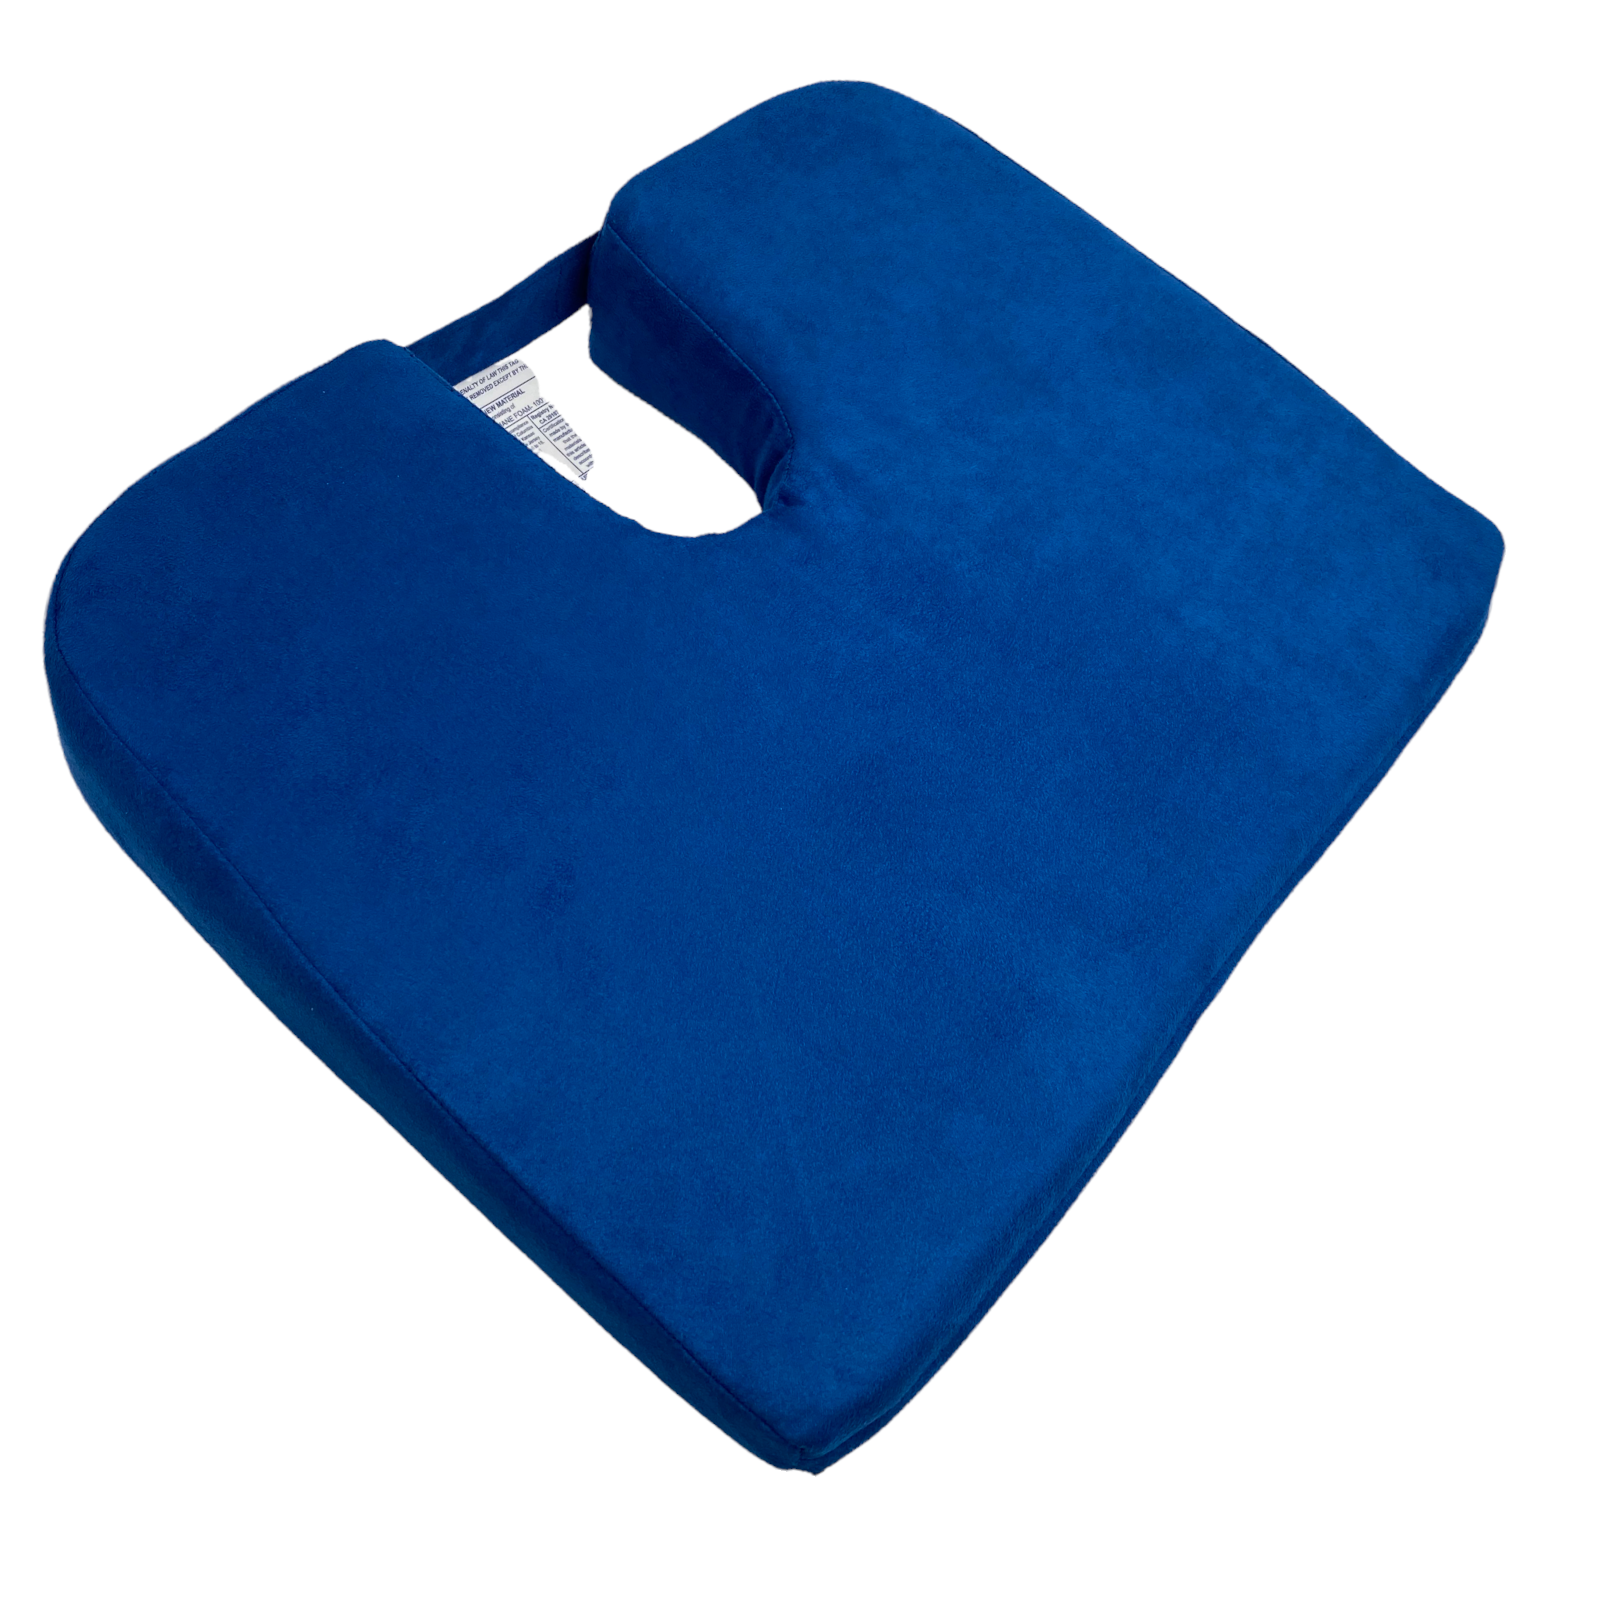 Extended Tush Cush Orthopedic Seat Cushion Relieves and Prevents Pain